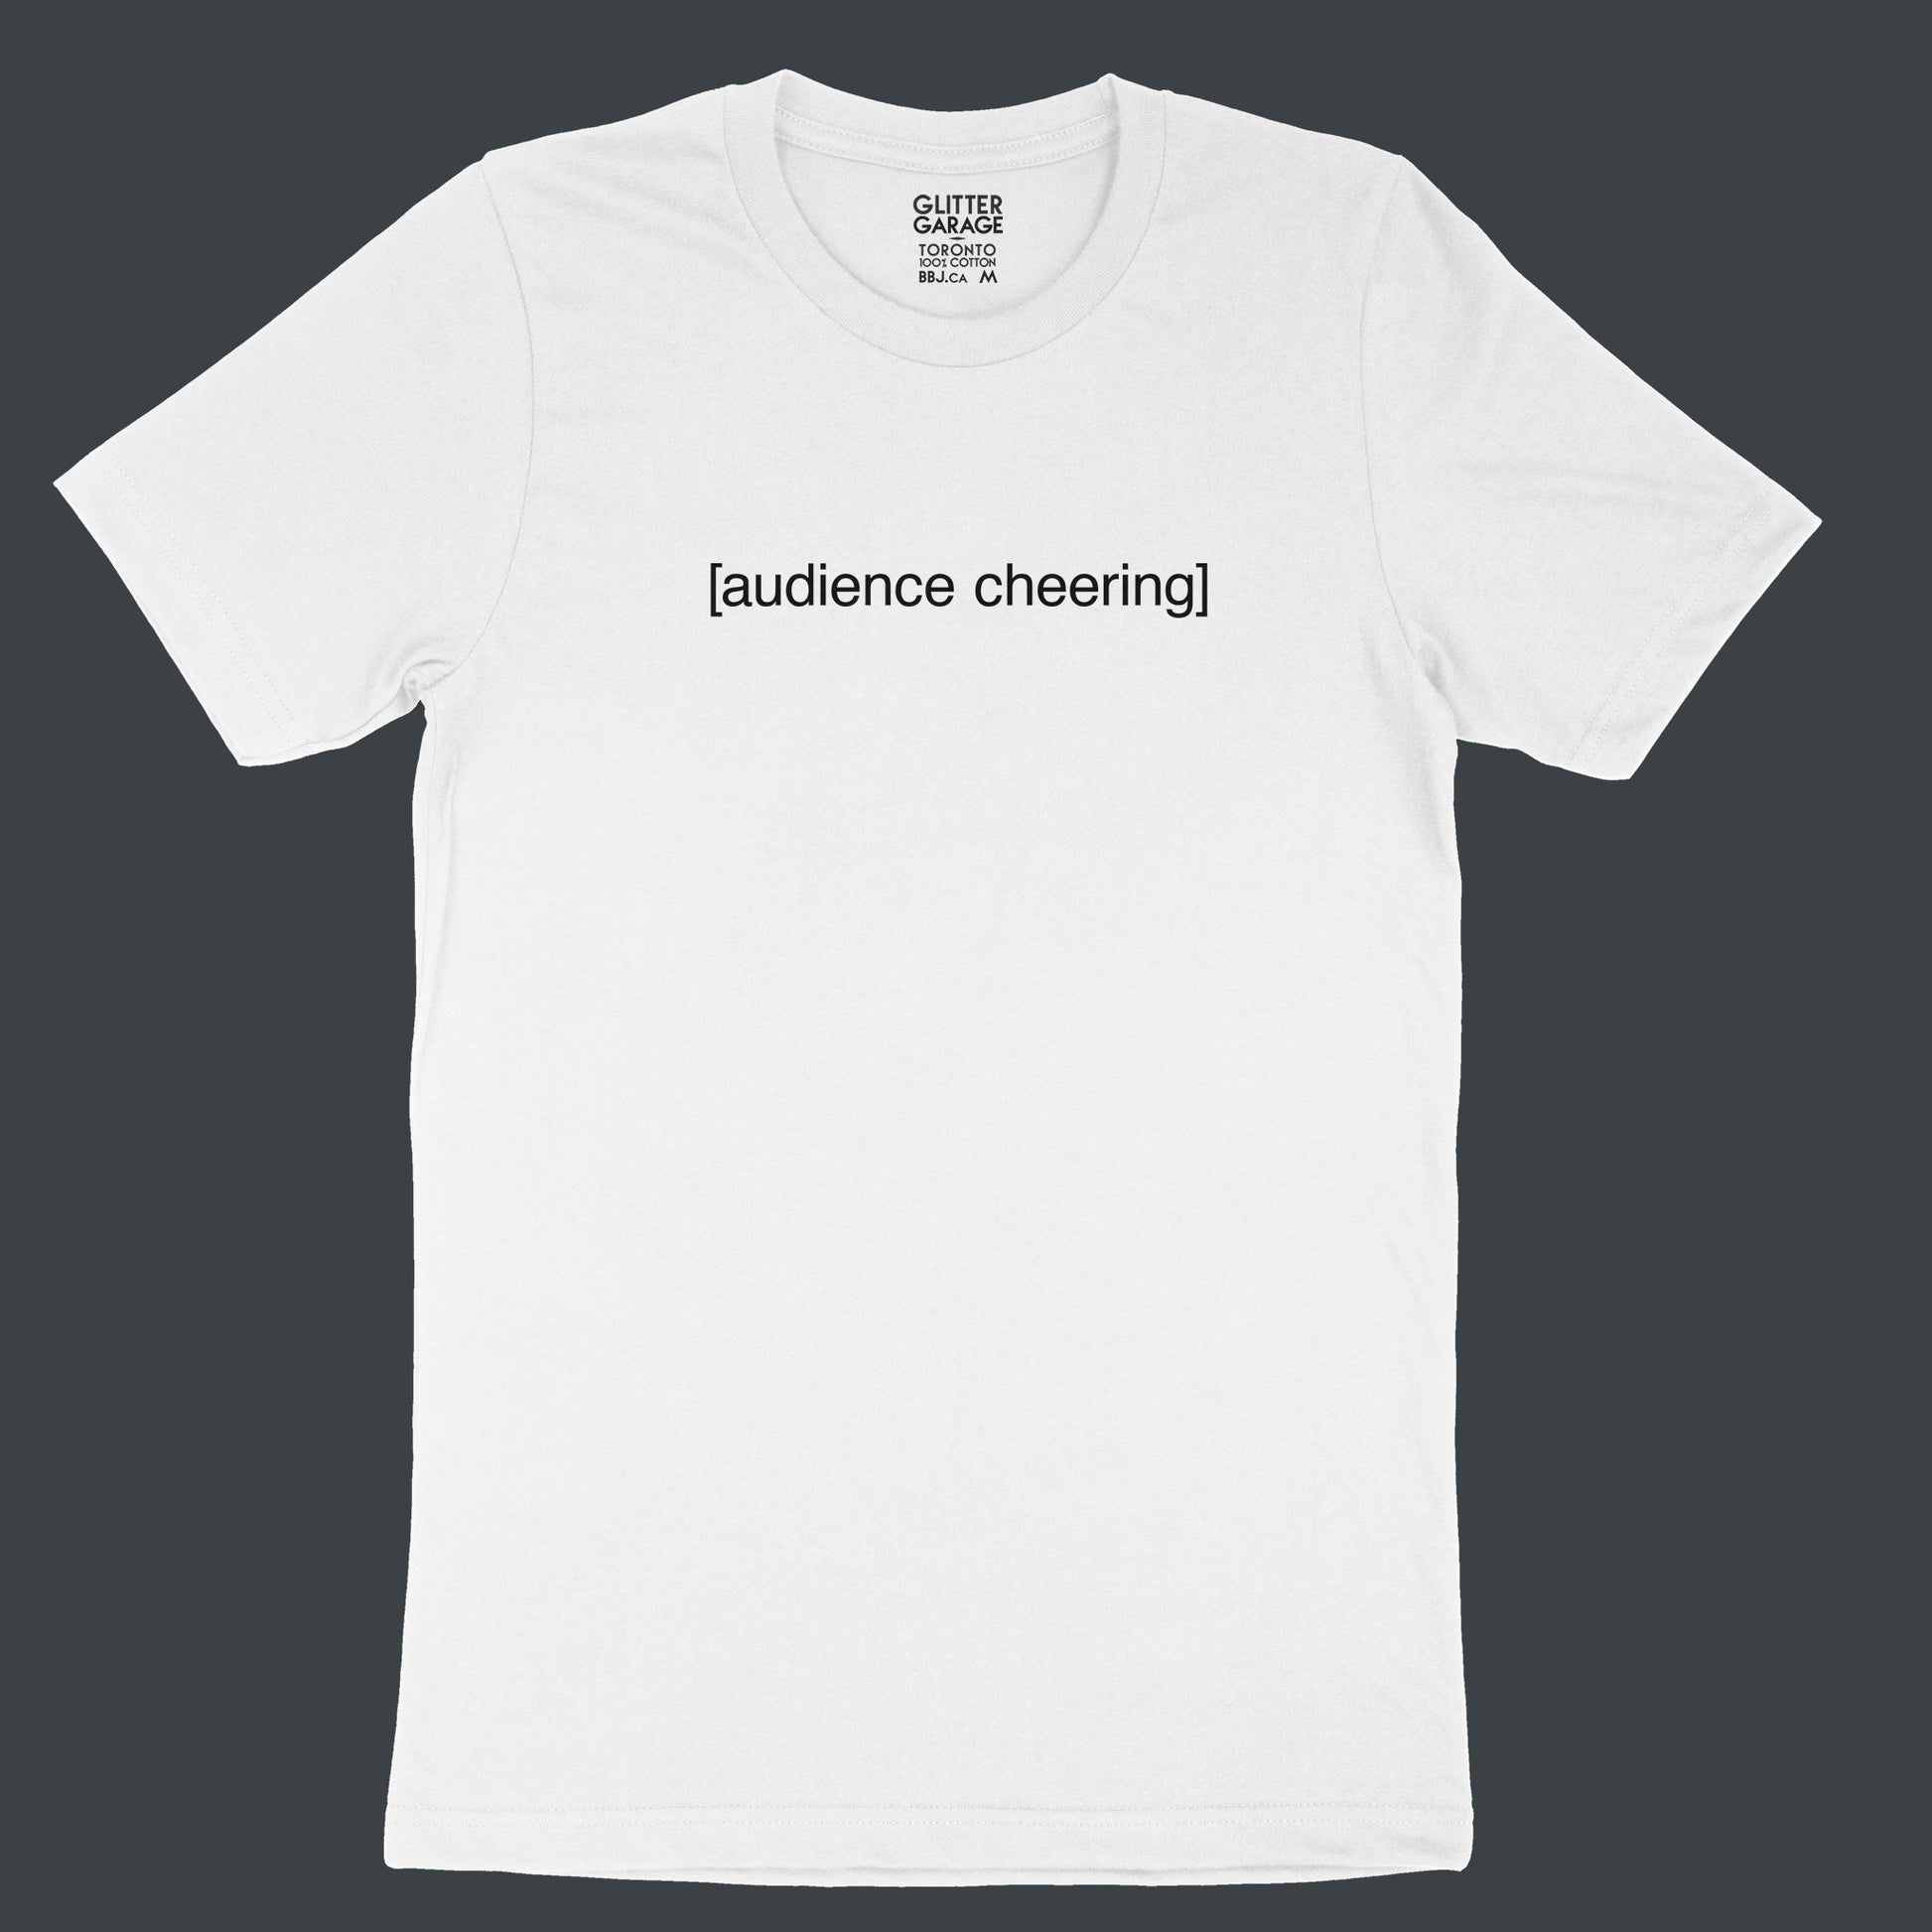 White unisex cotton t-shirt with [audience cheering] in black text by BBJ / Glitter Garage